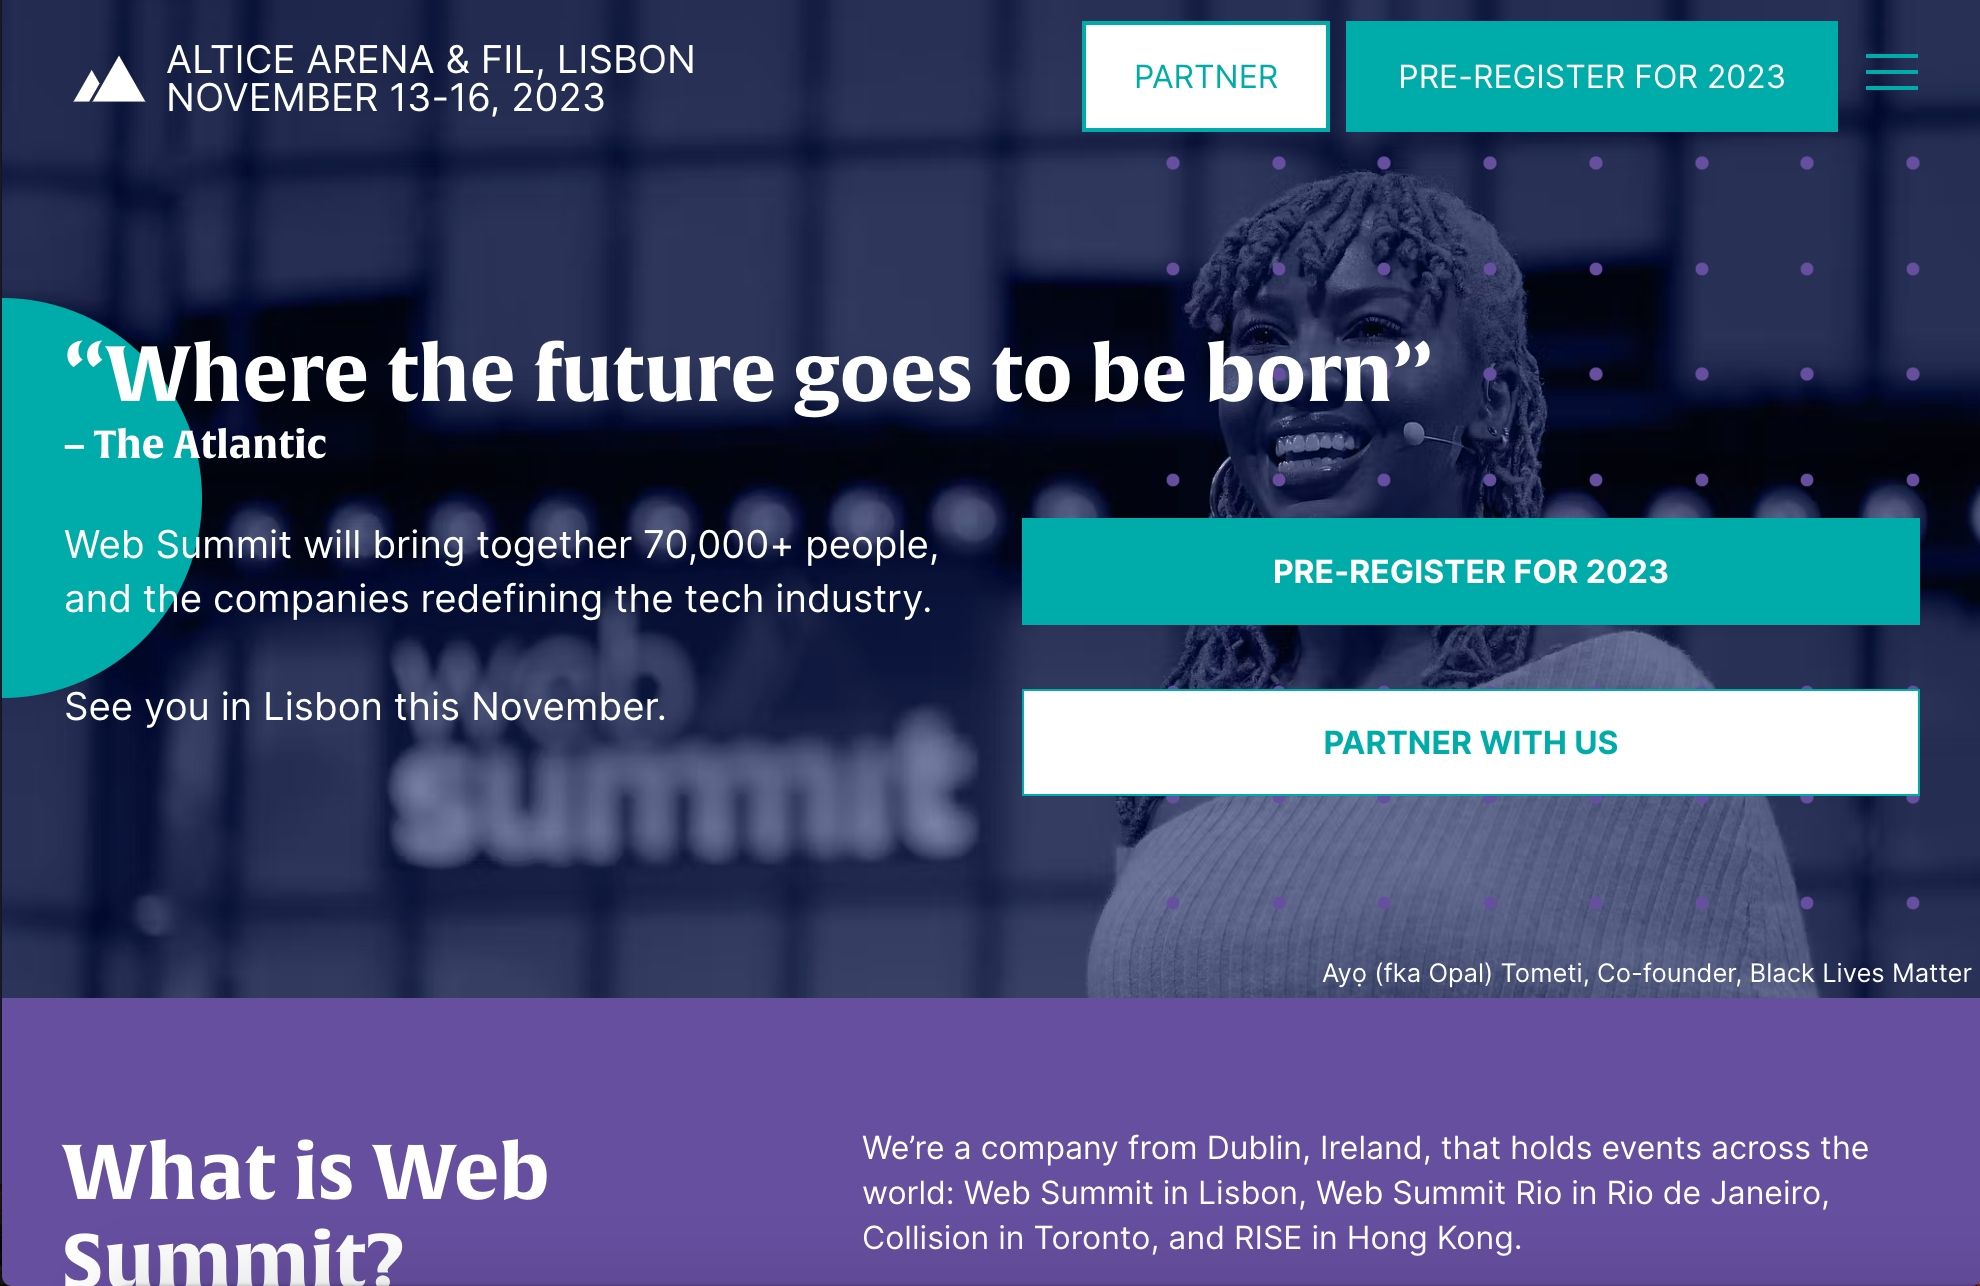 Sales and marketing event worth visiting in 2023: Web Summit